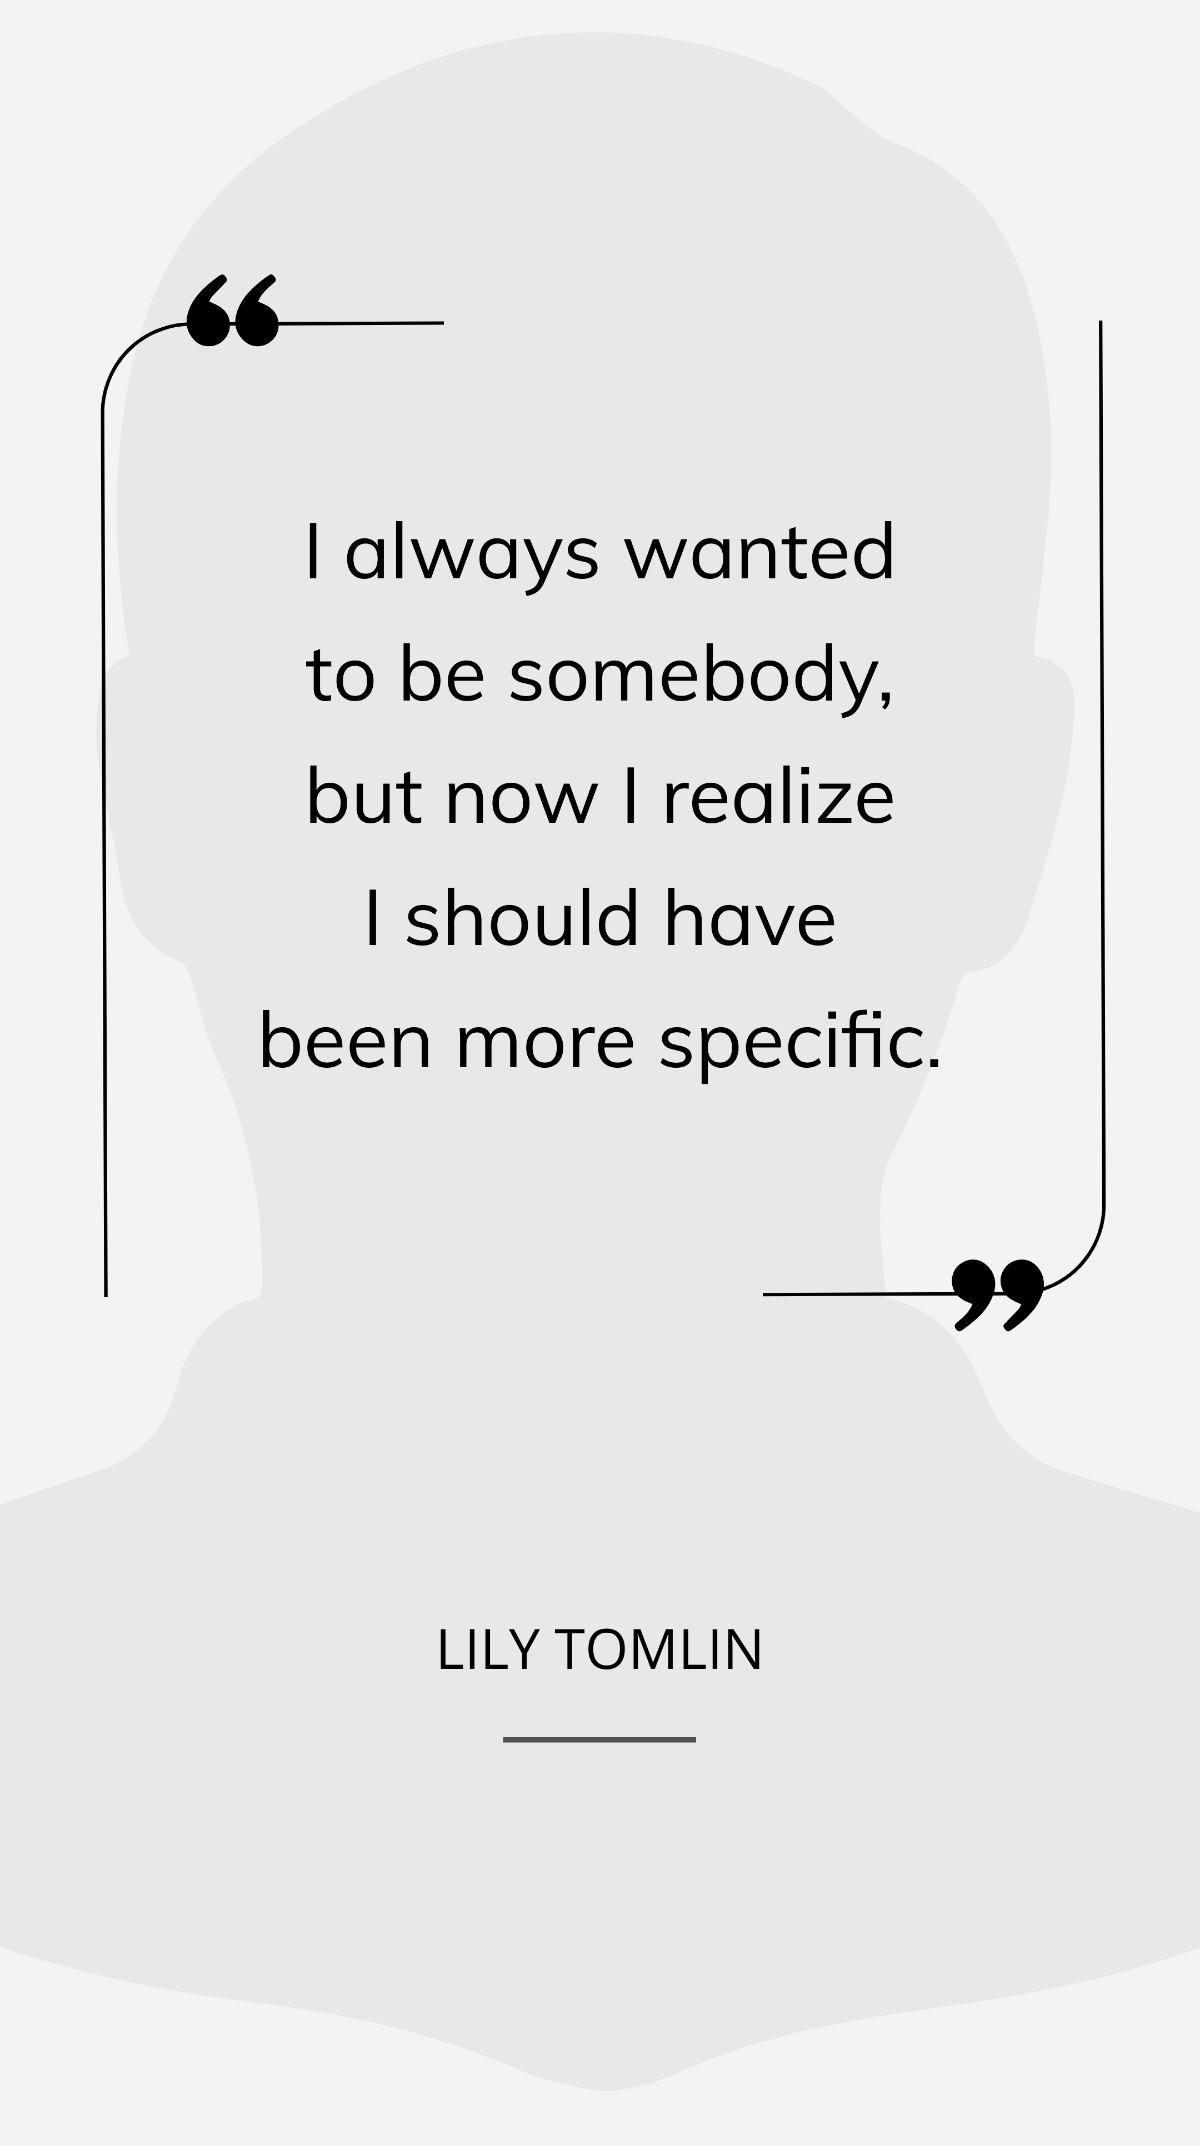 Lily Tomlin - I always wanted to be somebody, but now I realize I should have been more specific. Template